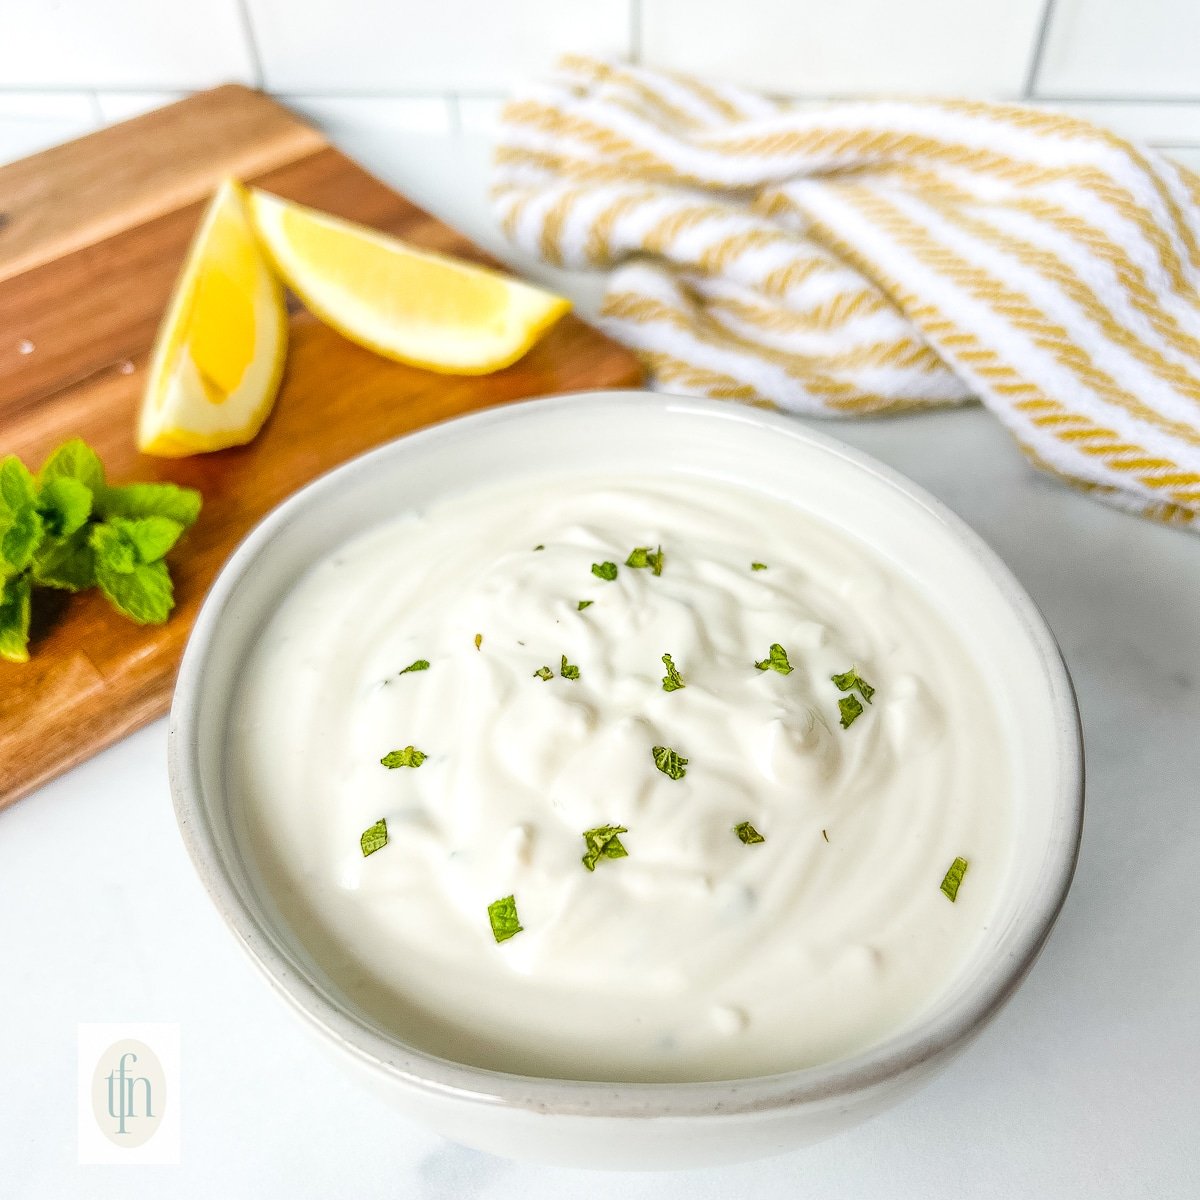 Yogurt dipping sauce in a small white bowl.